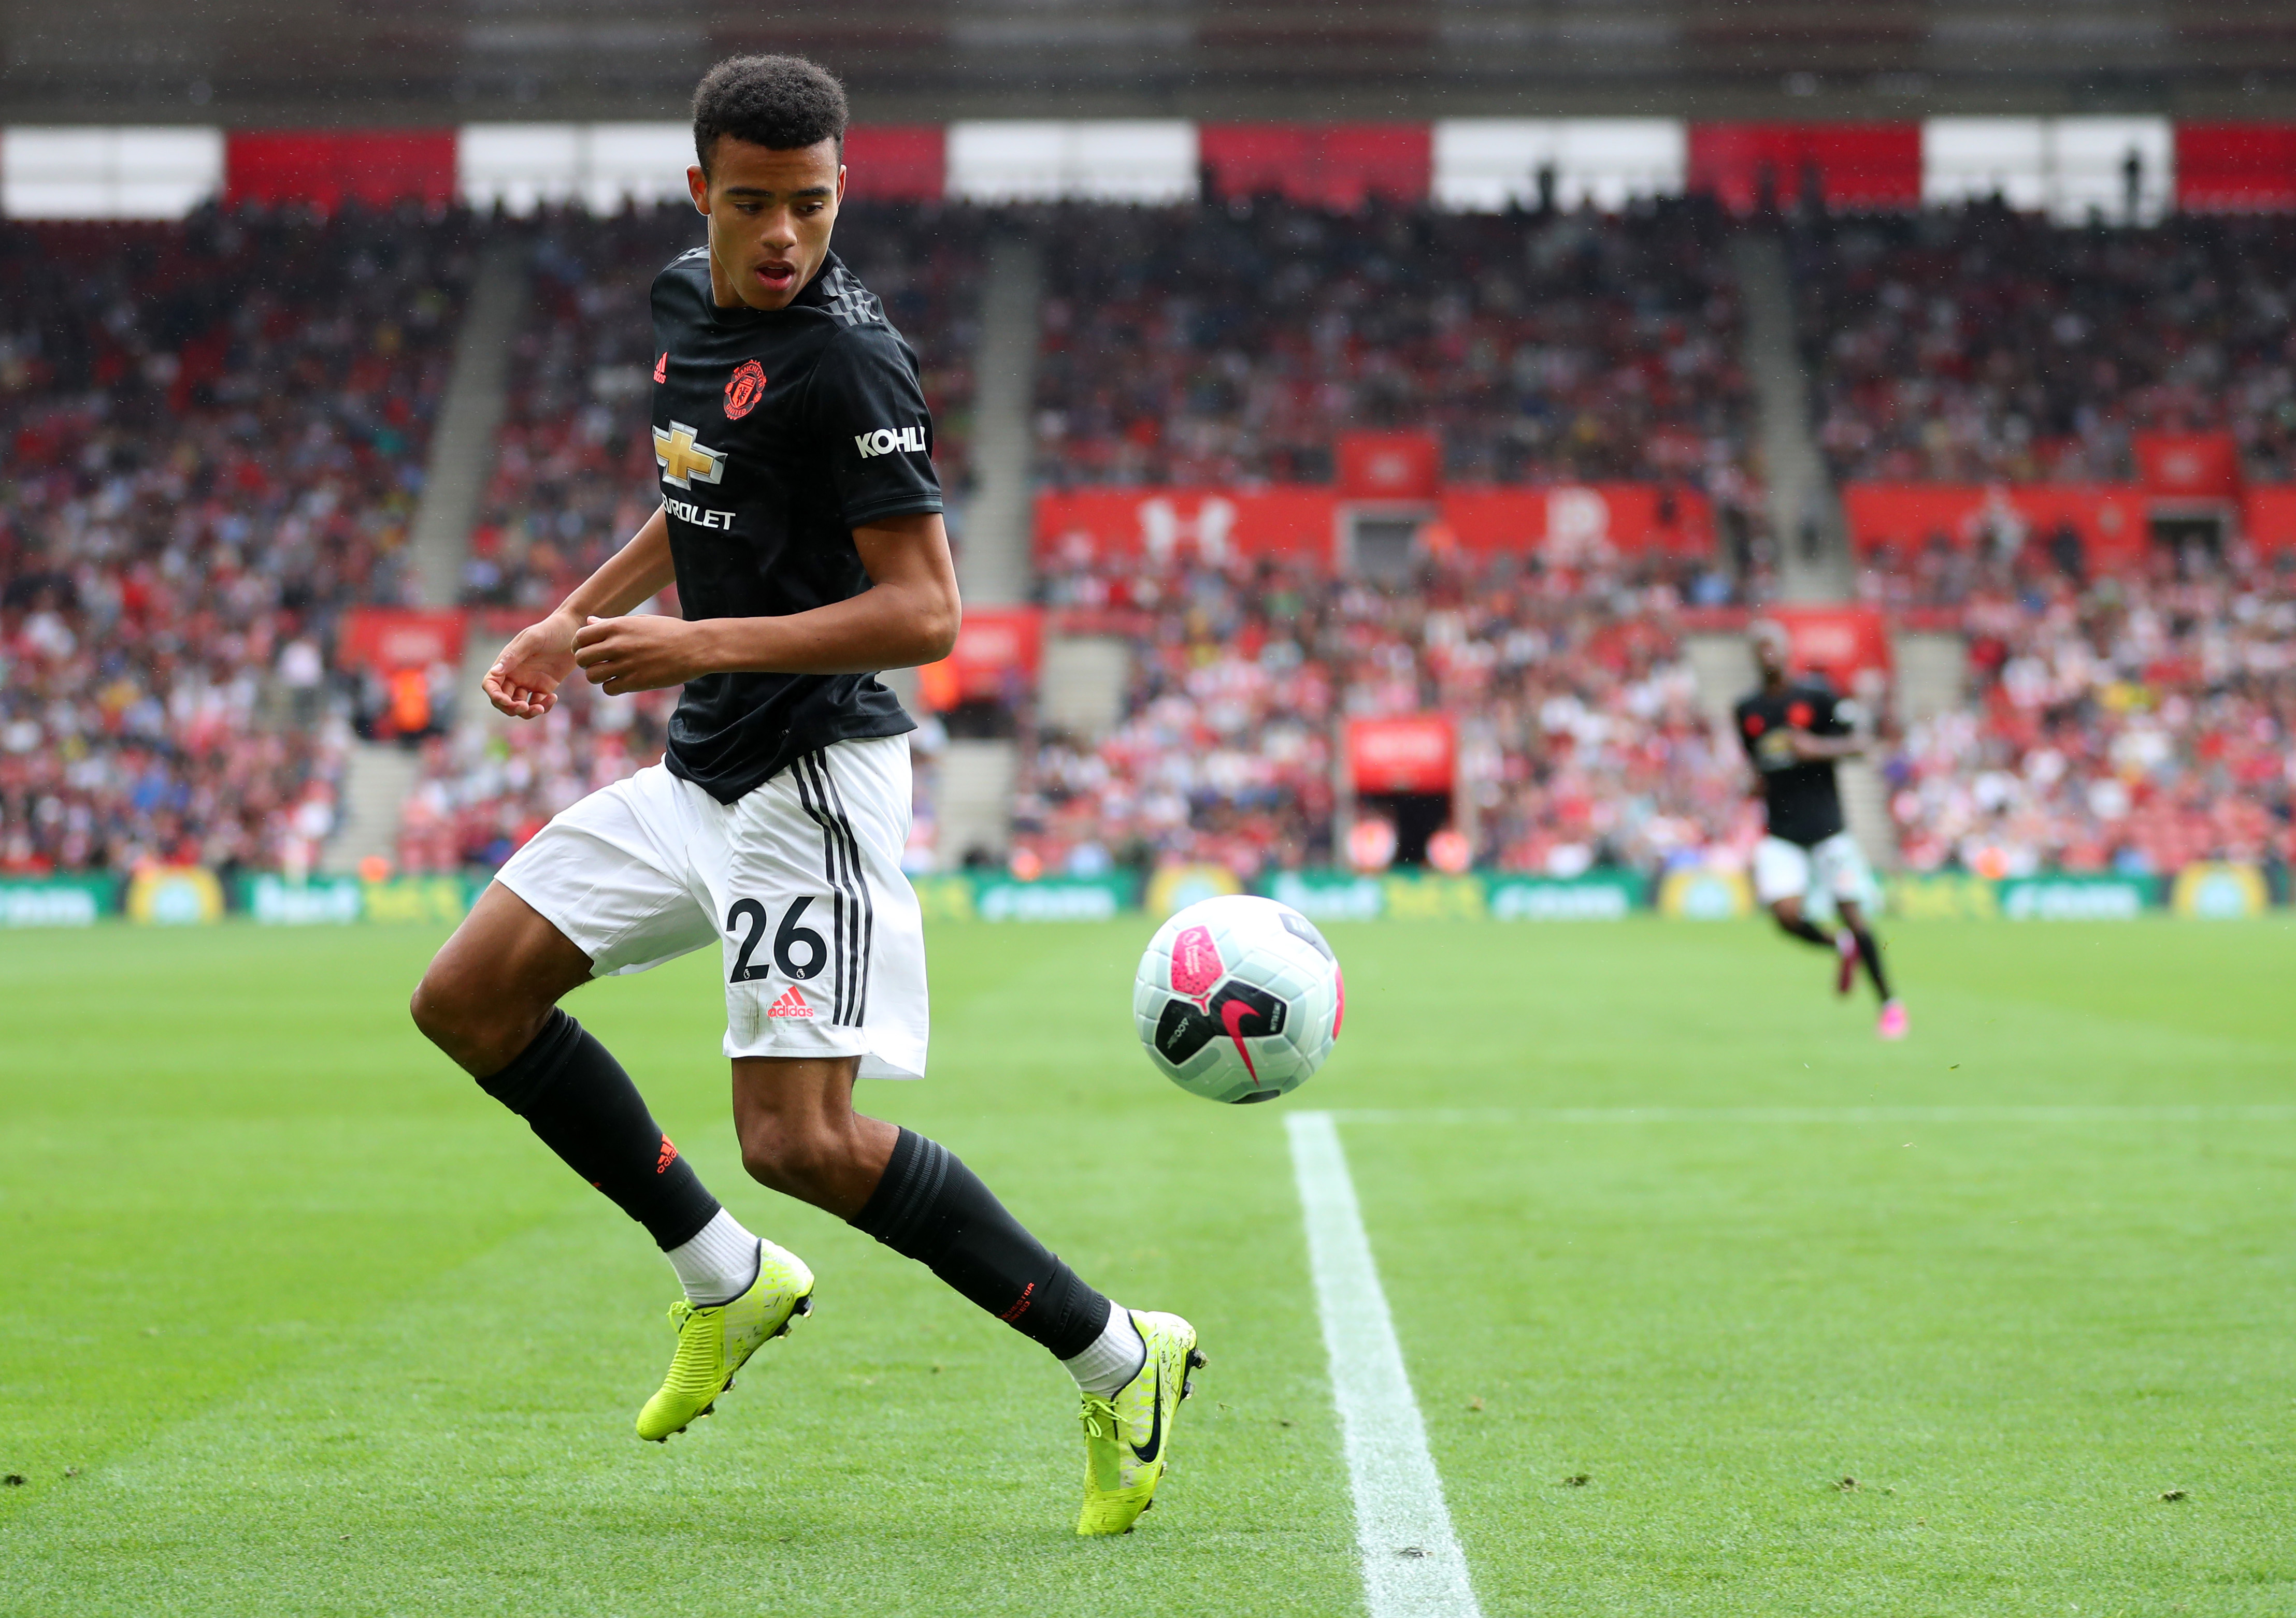 SOUTHAMPTON, ENGLAND - AUGUST 31: Mason Greenwood of Manchester United during the Premier League match between Southampton FC and Manchester United at St Mary's Stadium on August 31, 2019 in Southampton, United Kingdom. (Photo by Catherine Ivill/Getty Images)